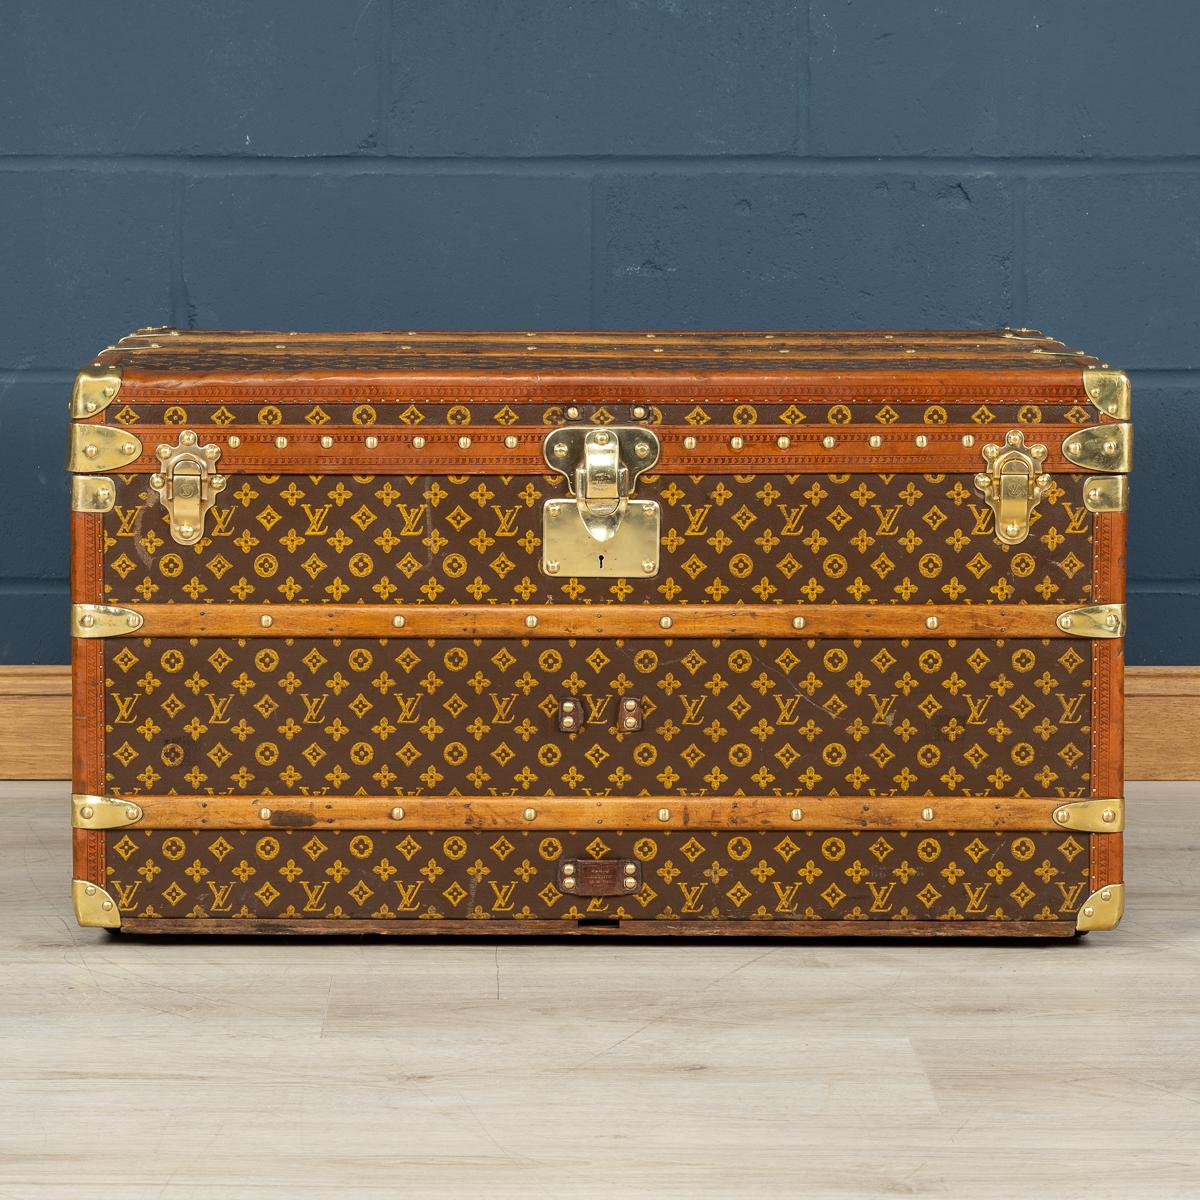 Gorgeous and most importantly complete, this early 20th century Louis Vuitton trunk was the must have item of any elite traveller. Covered in the world famous LV monogrammed canvas, with its lozine borders and brass fitting it would have been the